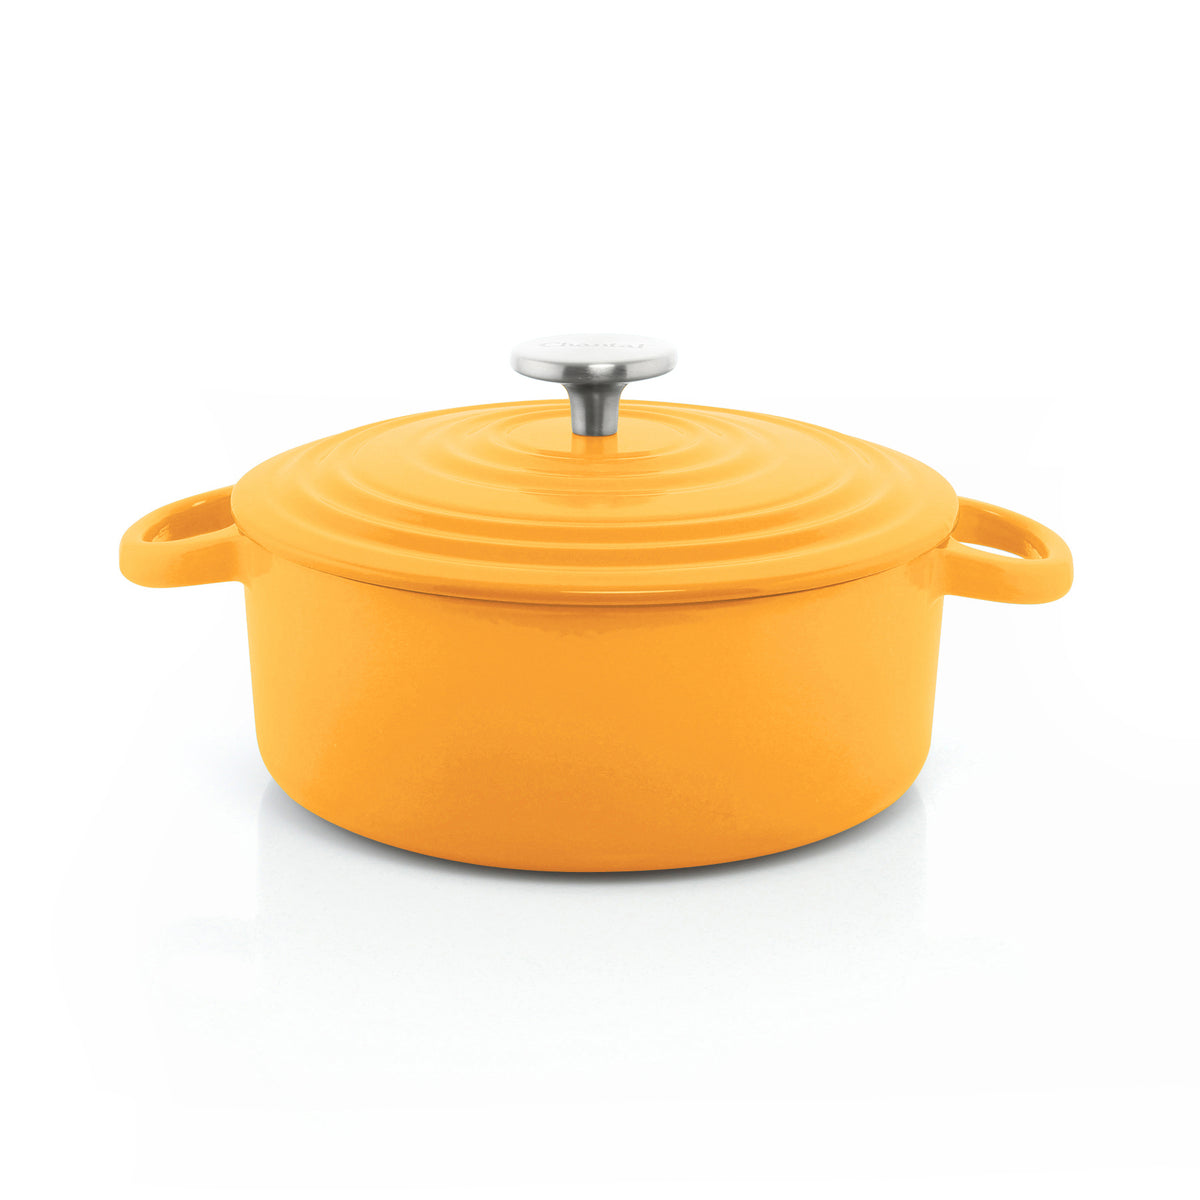 Taste Of Home Dutch Oven with Lid, Enameled Cast Iron, 5-Quart